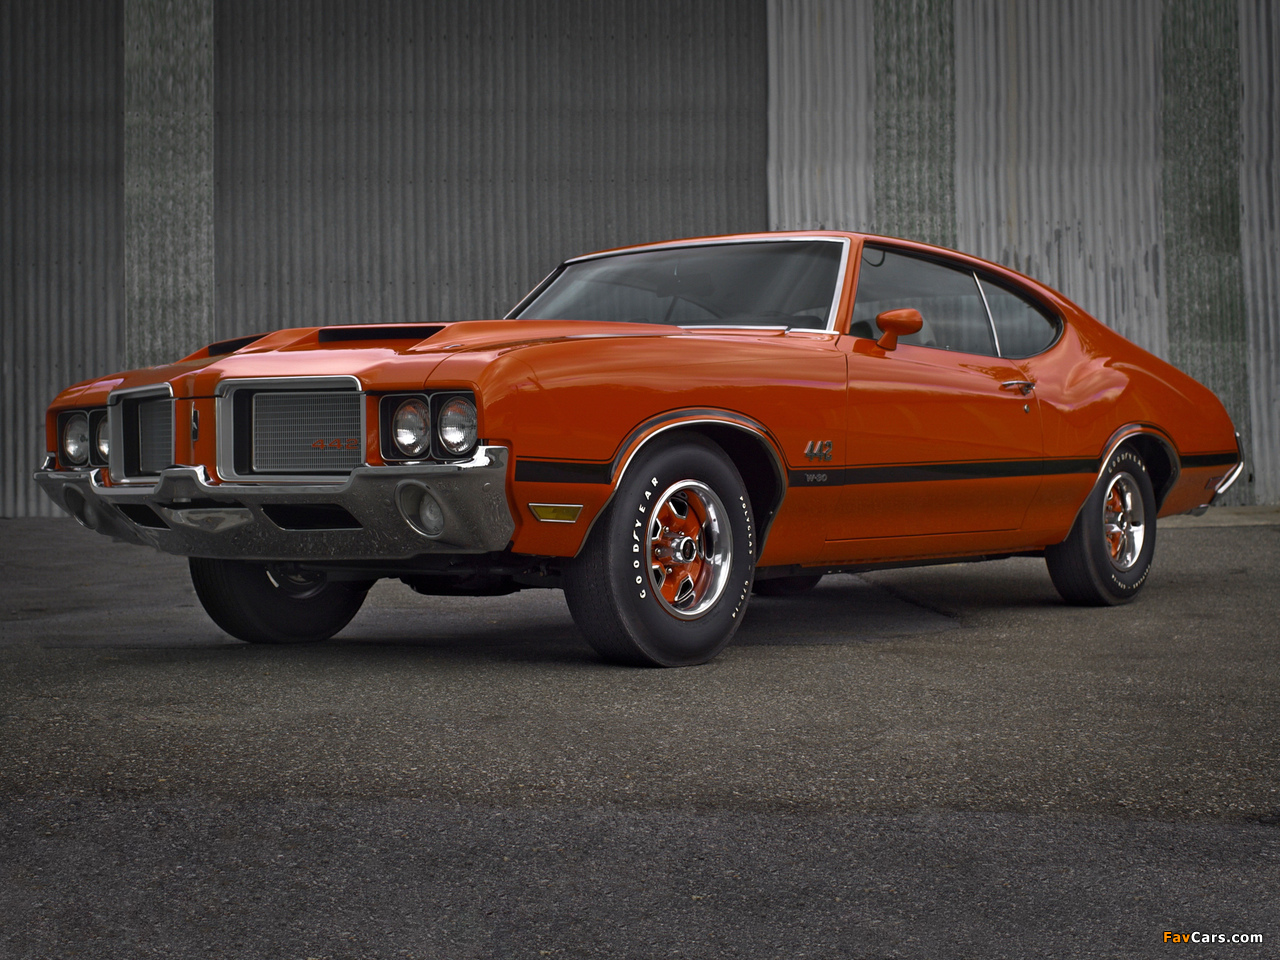 Images of Oldsmobile Cutlass 442 W-30 Hardtop Coupe 1972 (1280 x 960)